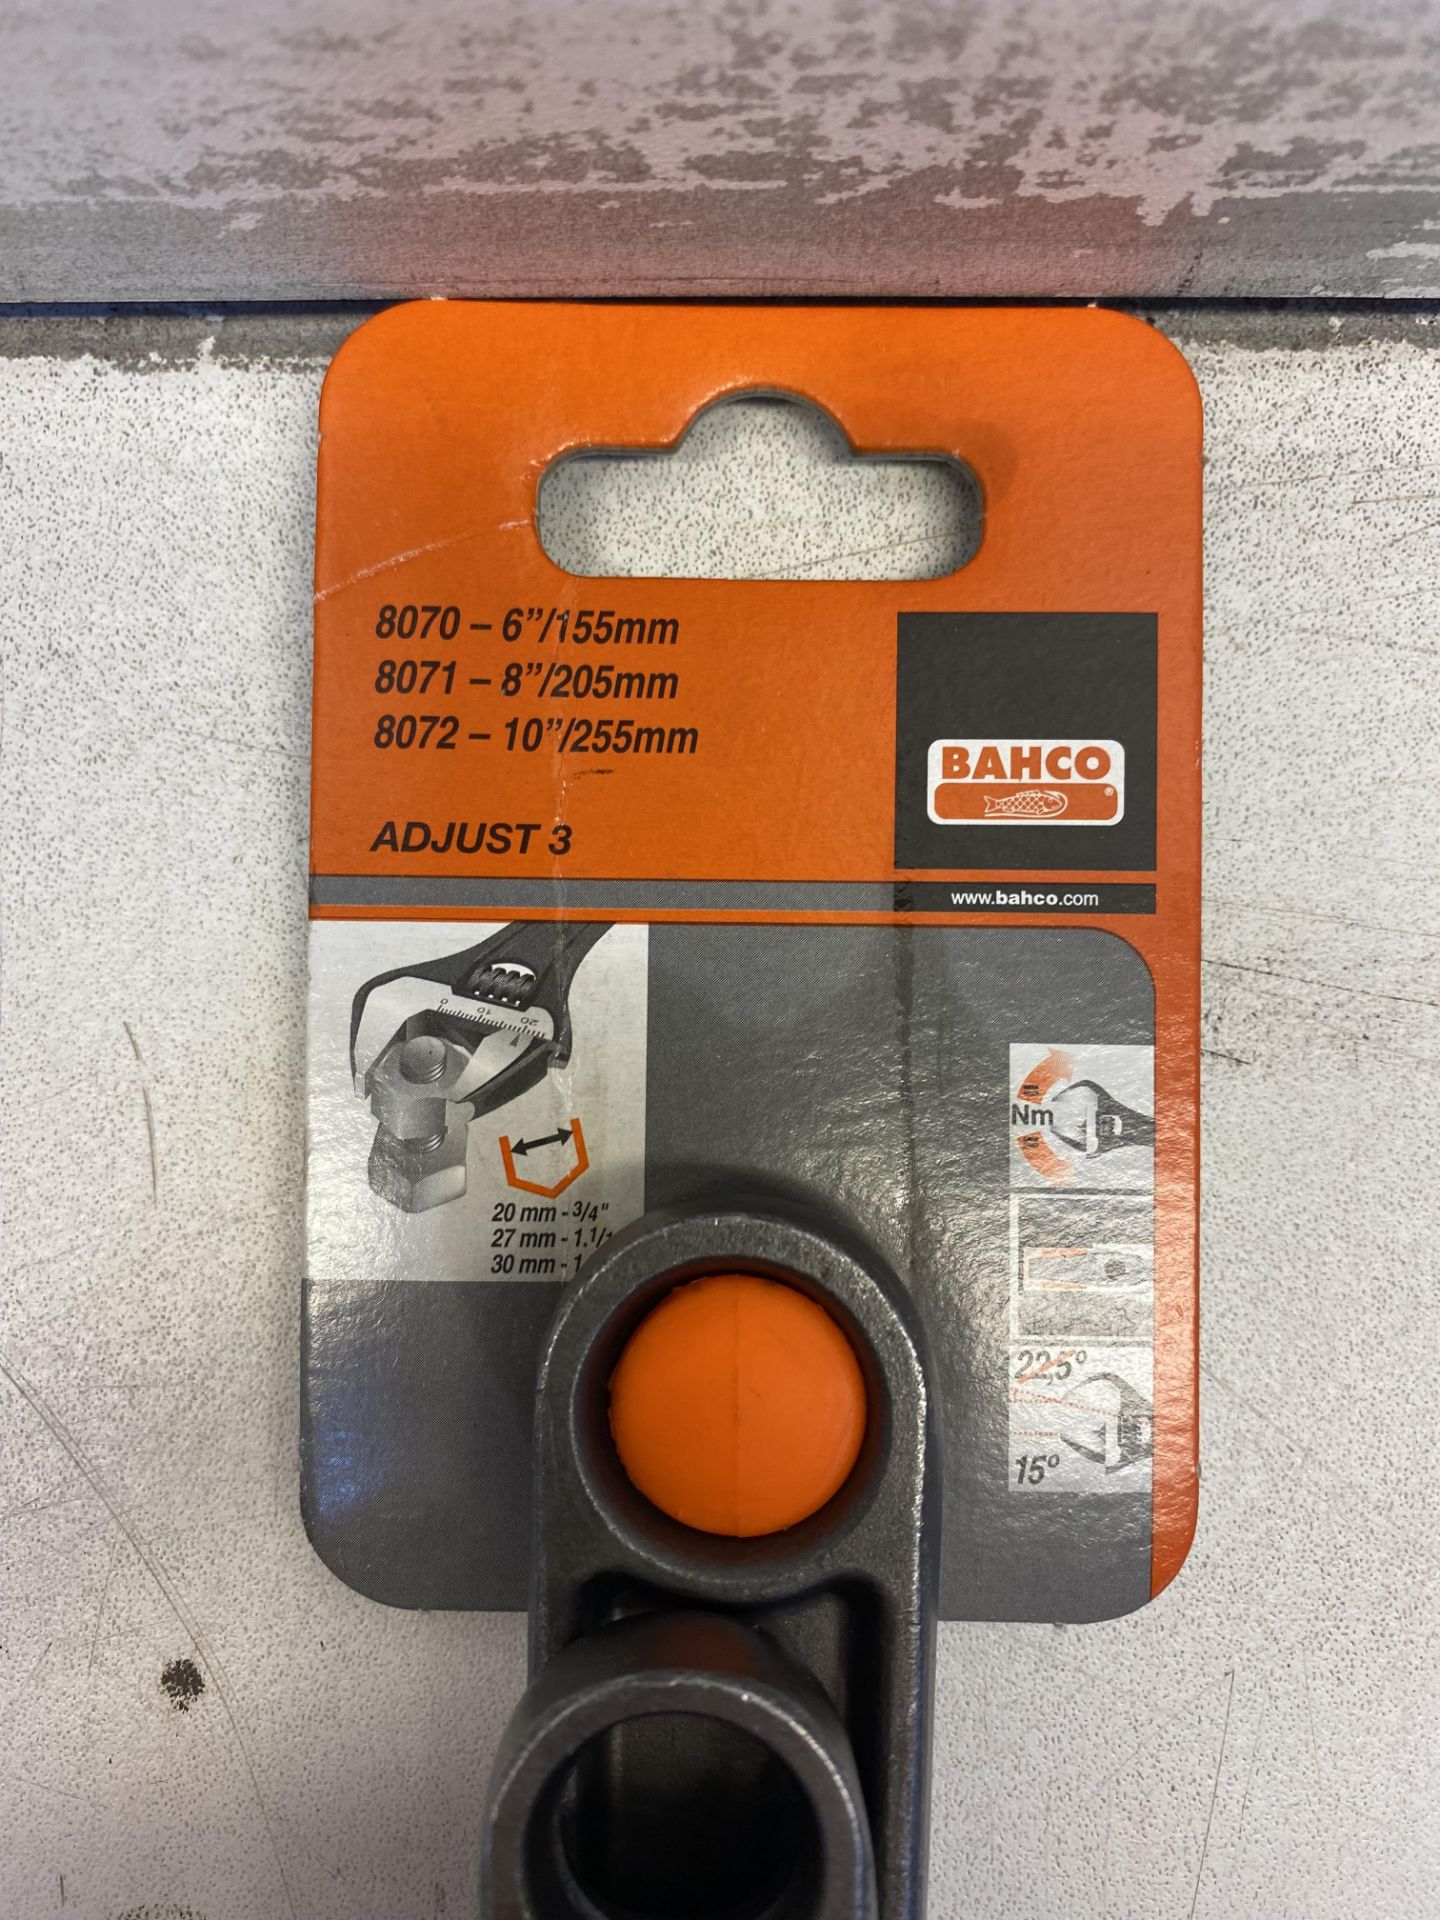 3 x Bahco XMS21ADJ3 3pc 80 Series Adjustable Wrench Sets - Image 2 of 2